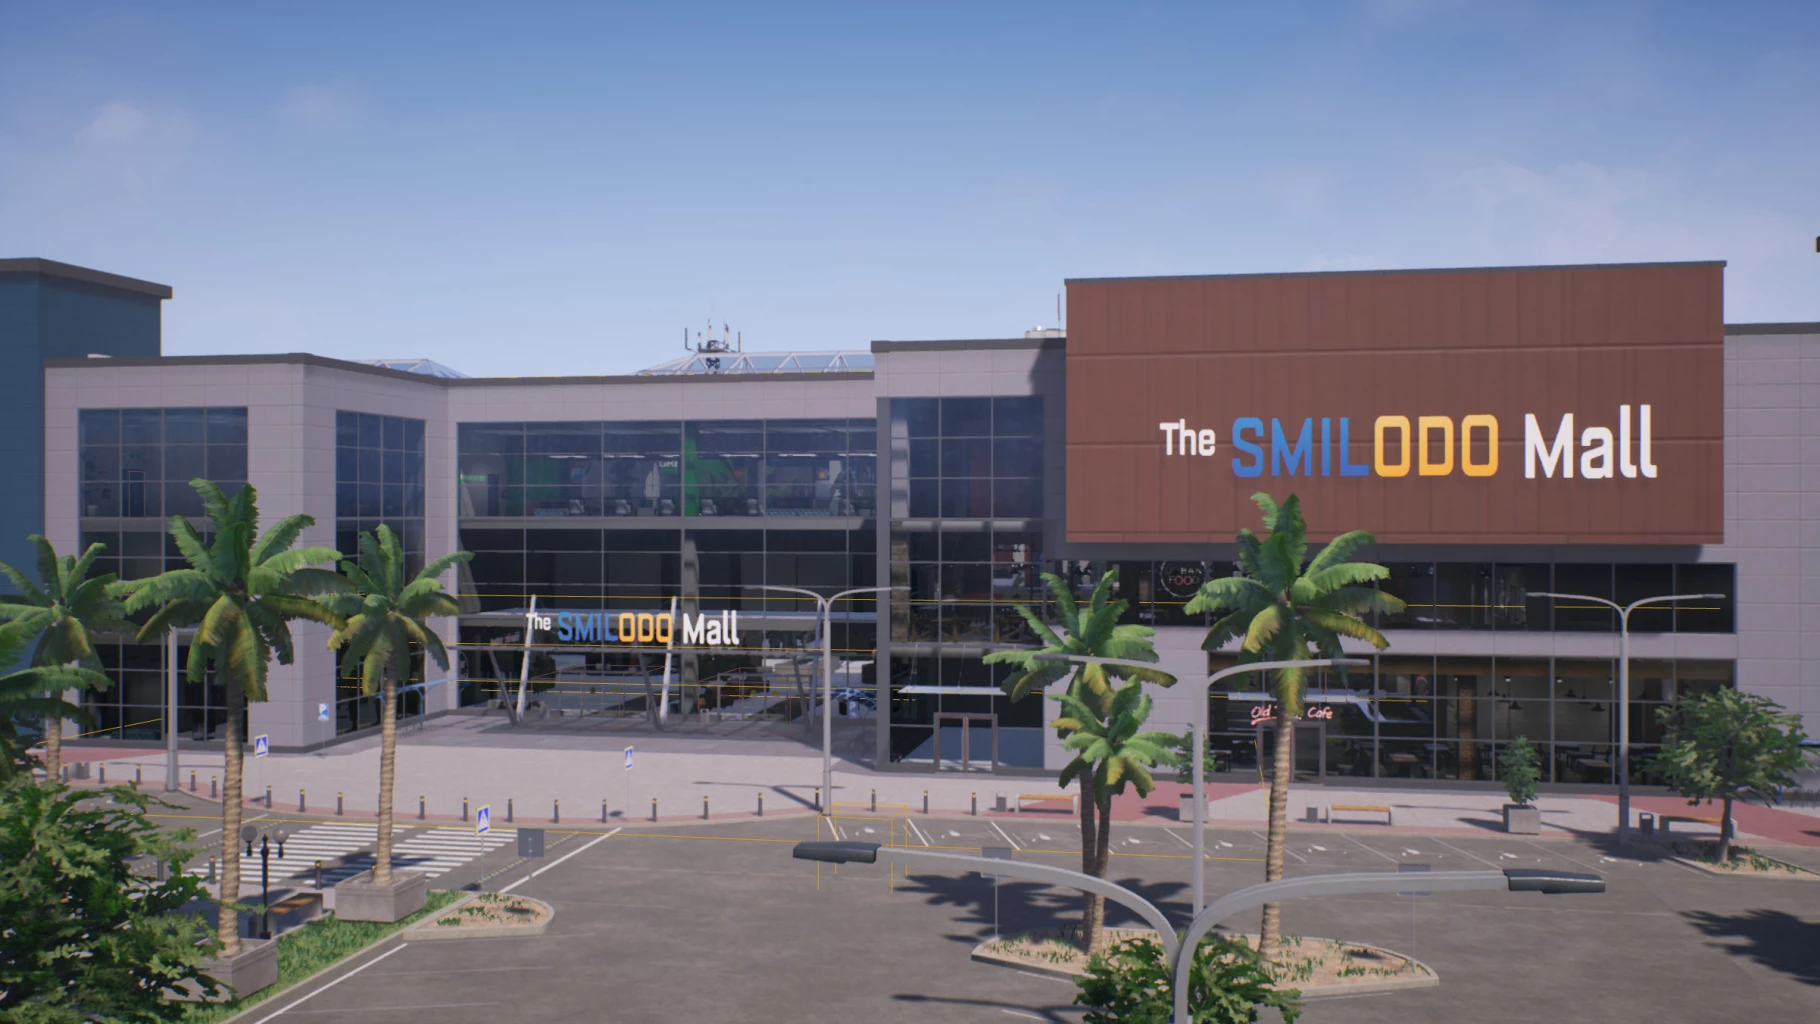 Introducing Smilodo Mall: the NFT bringing eCommerce to the Metaverse